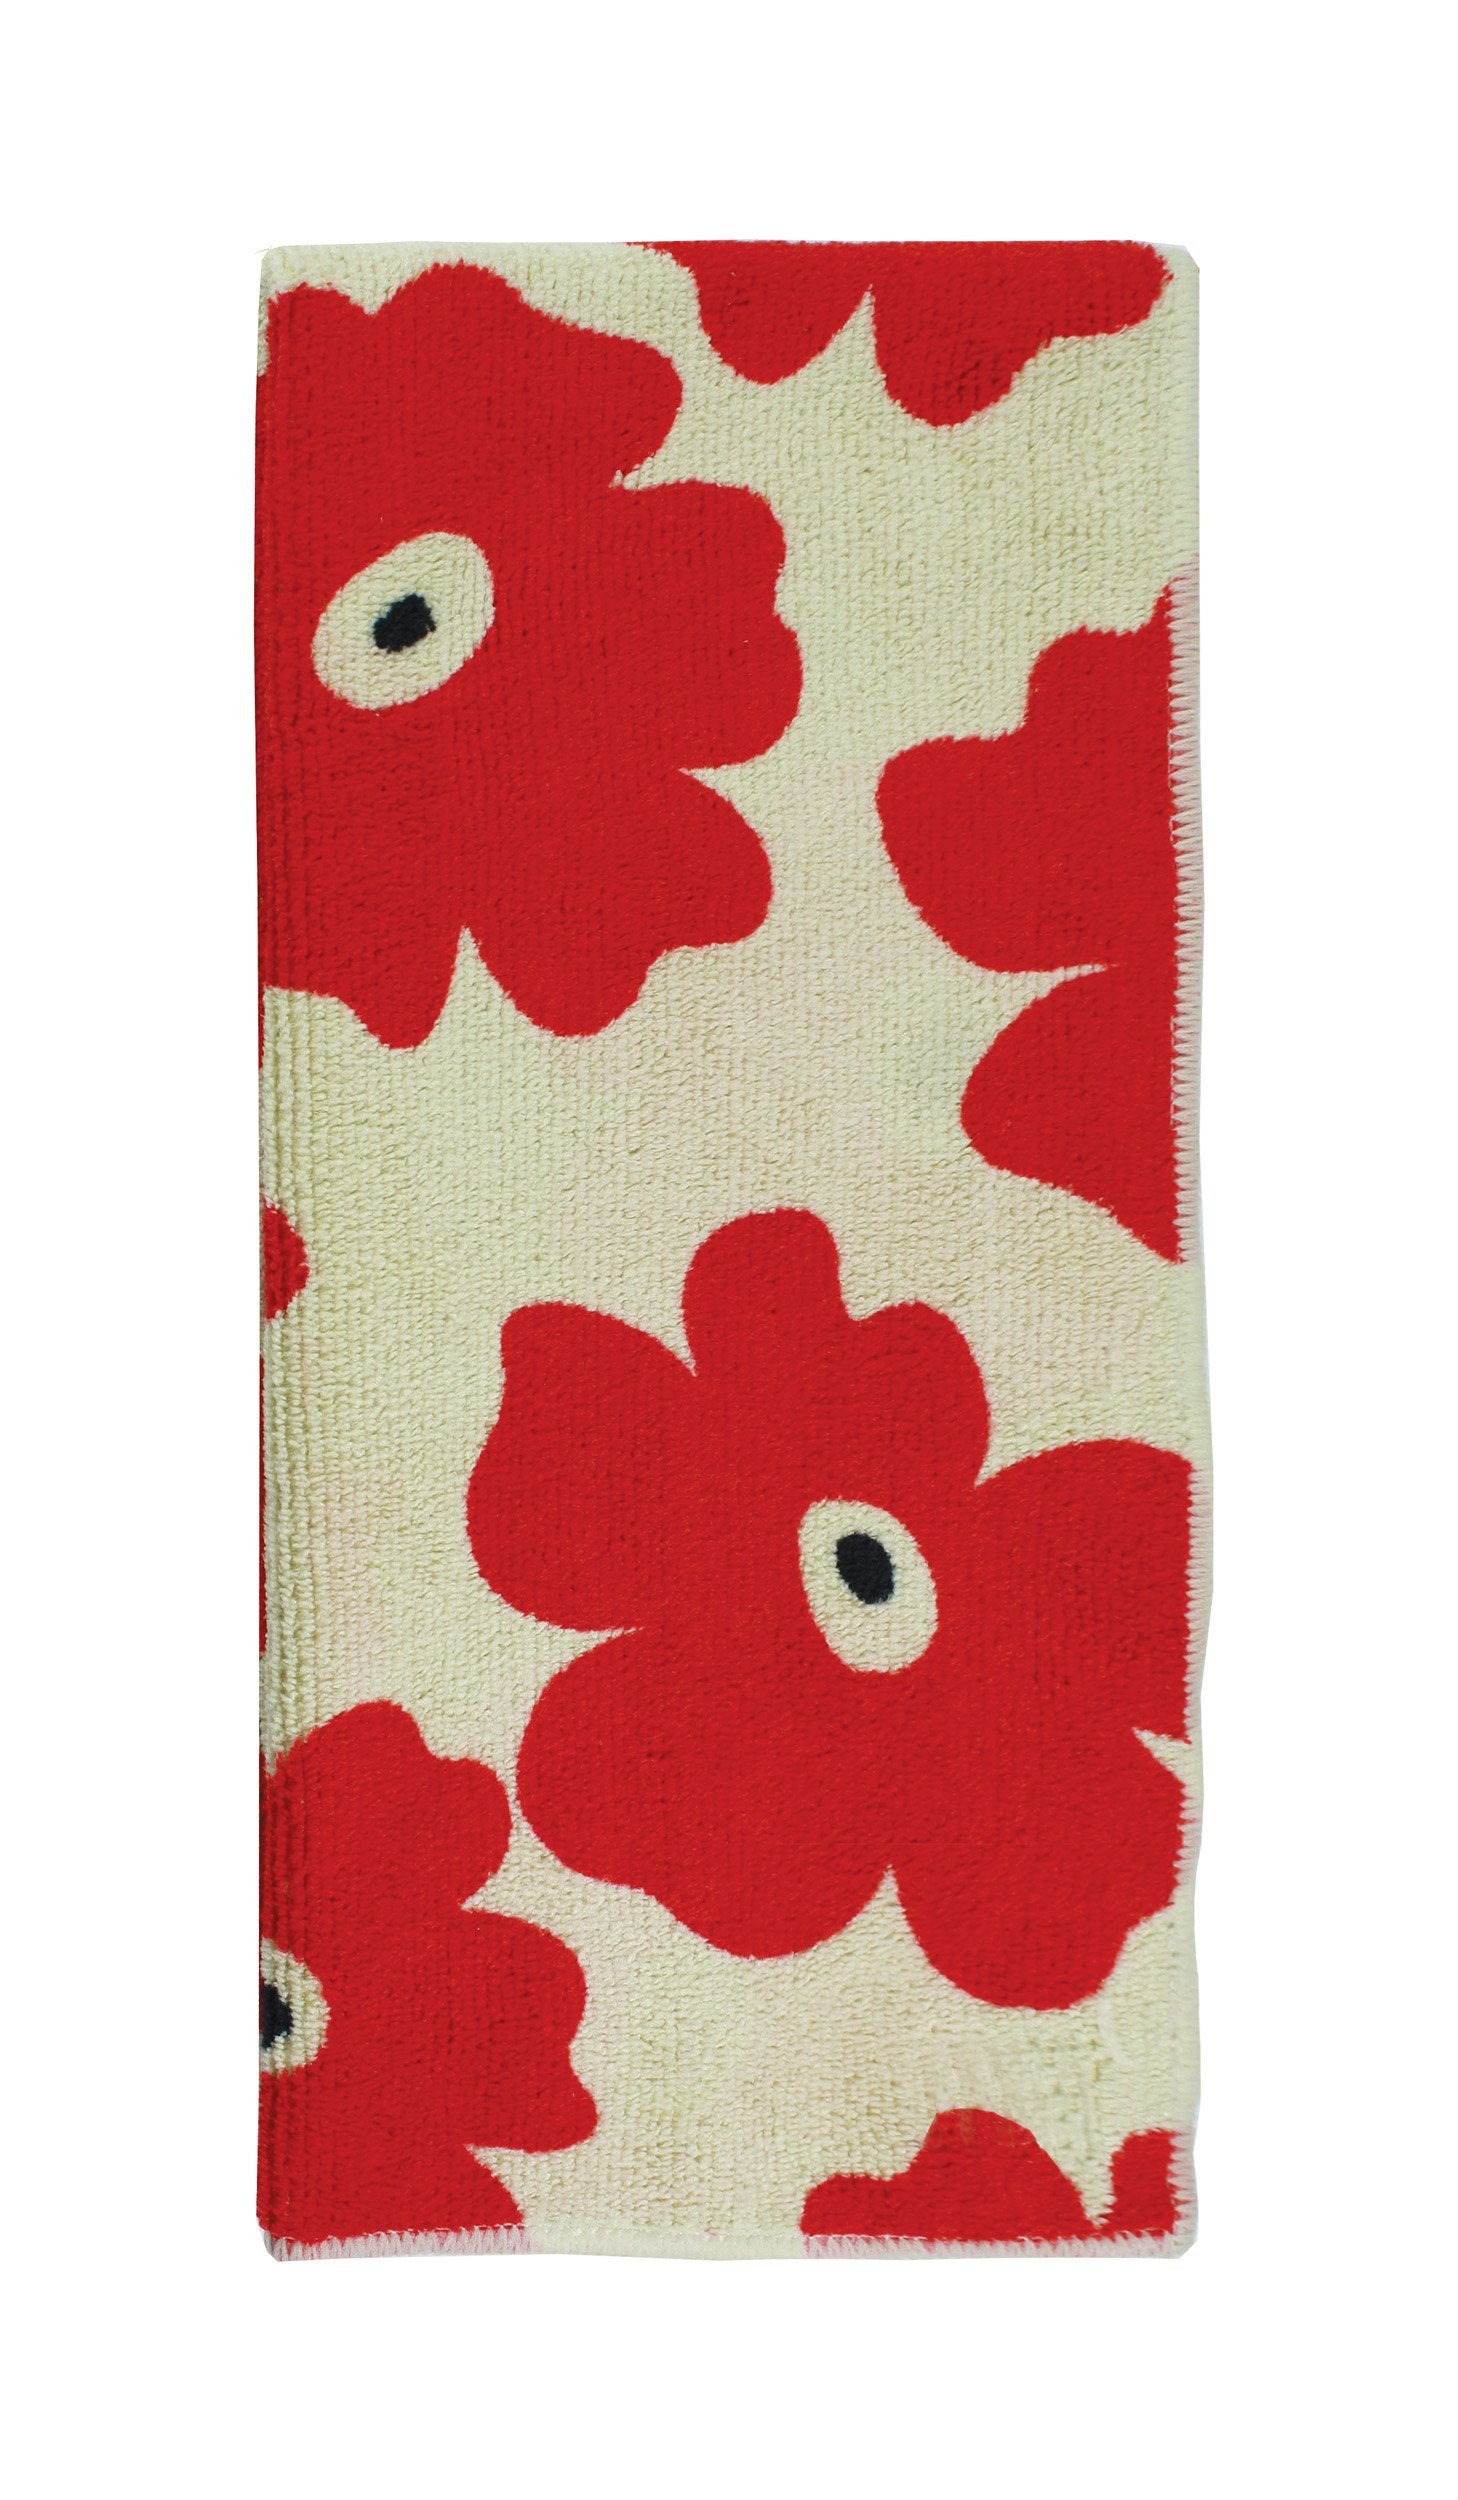 MUkitchen Microfiber Dishtowel, 16 by 24-Inches, Red Poppy